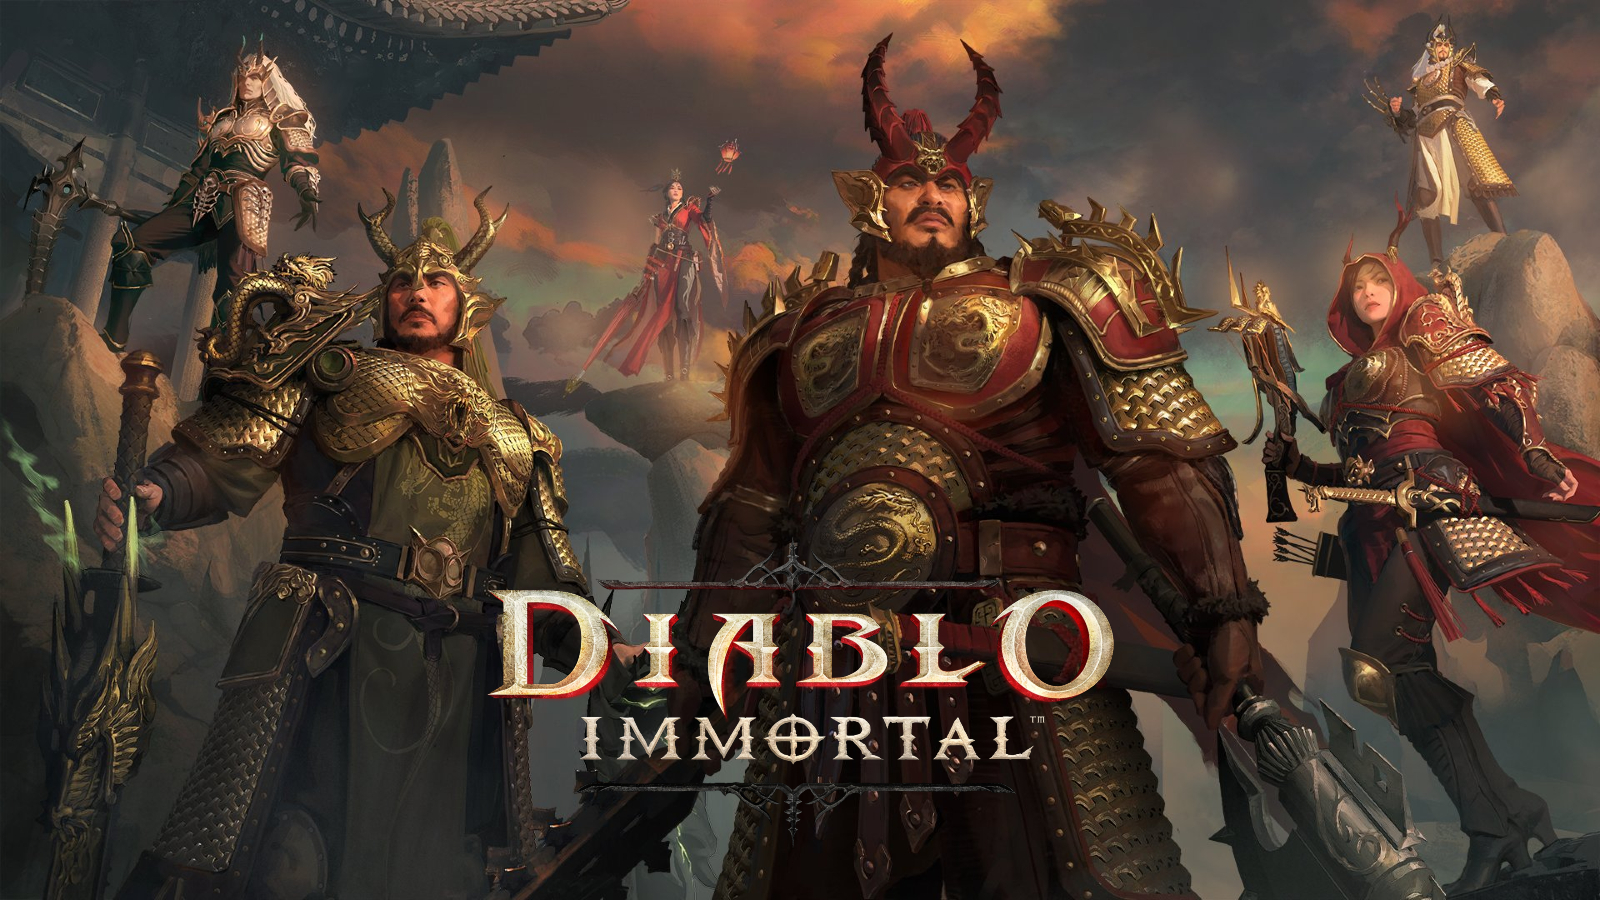 Diablo Immortal Saved? LARGEST PATCH EVER! First MAJOR UPDATE FULL